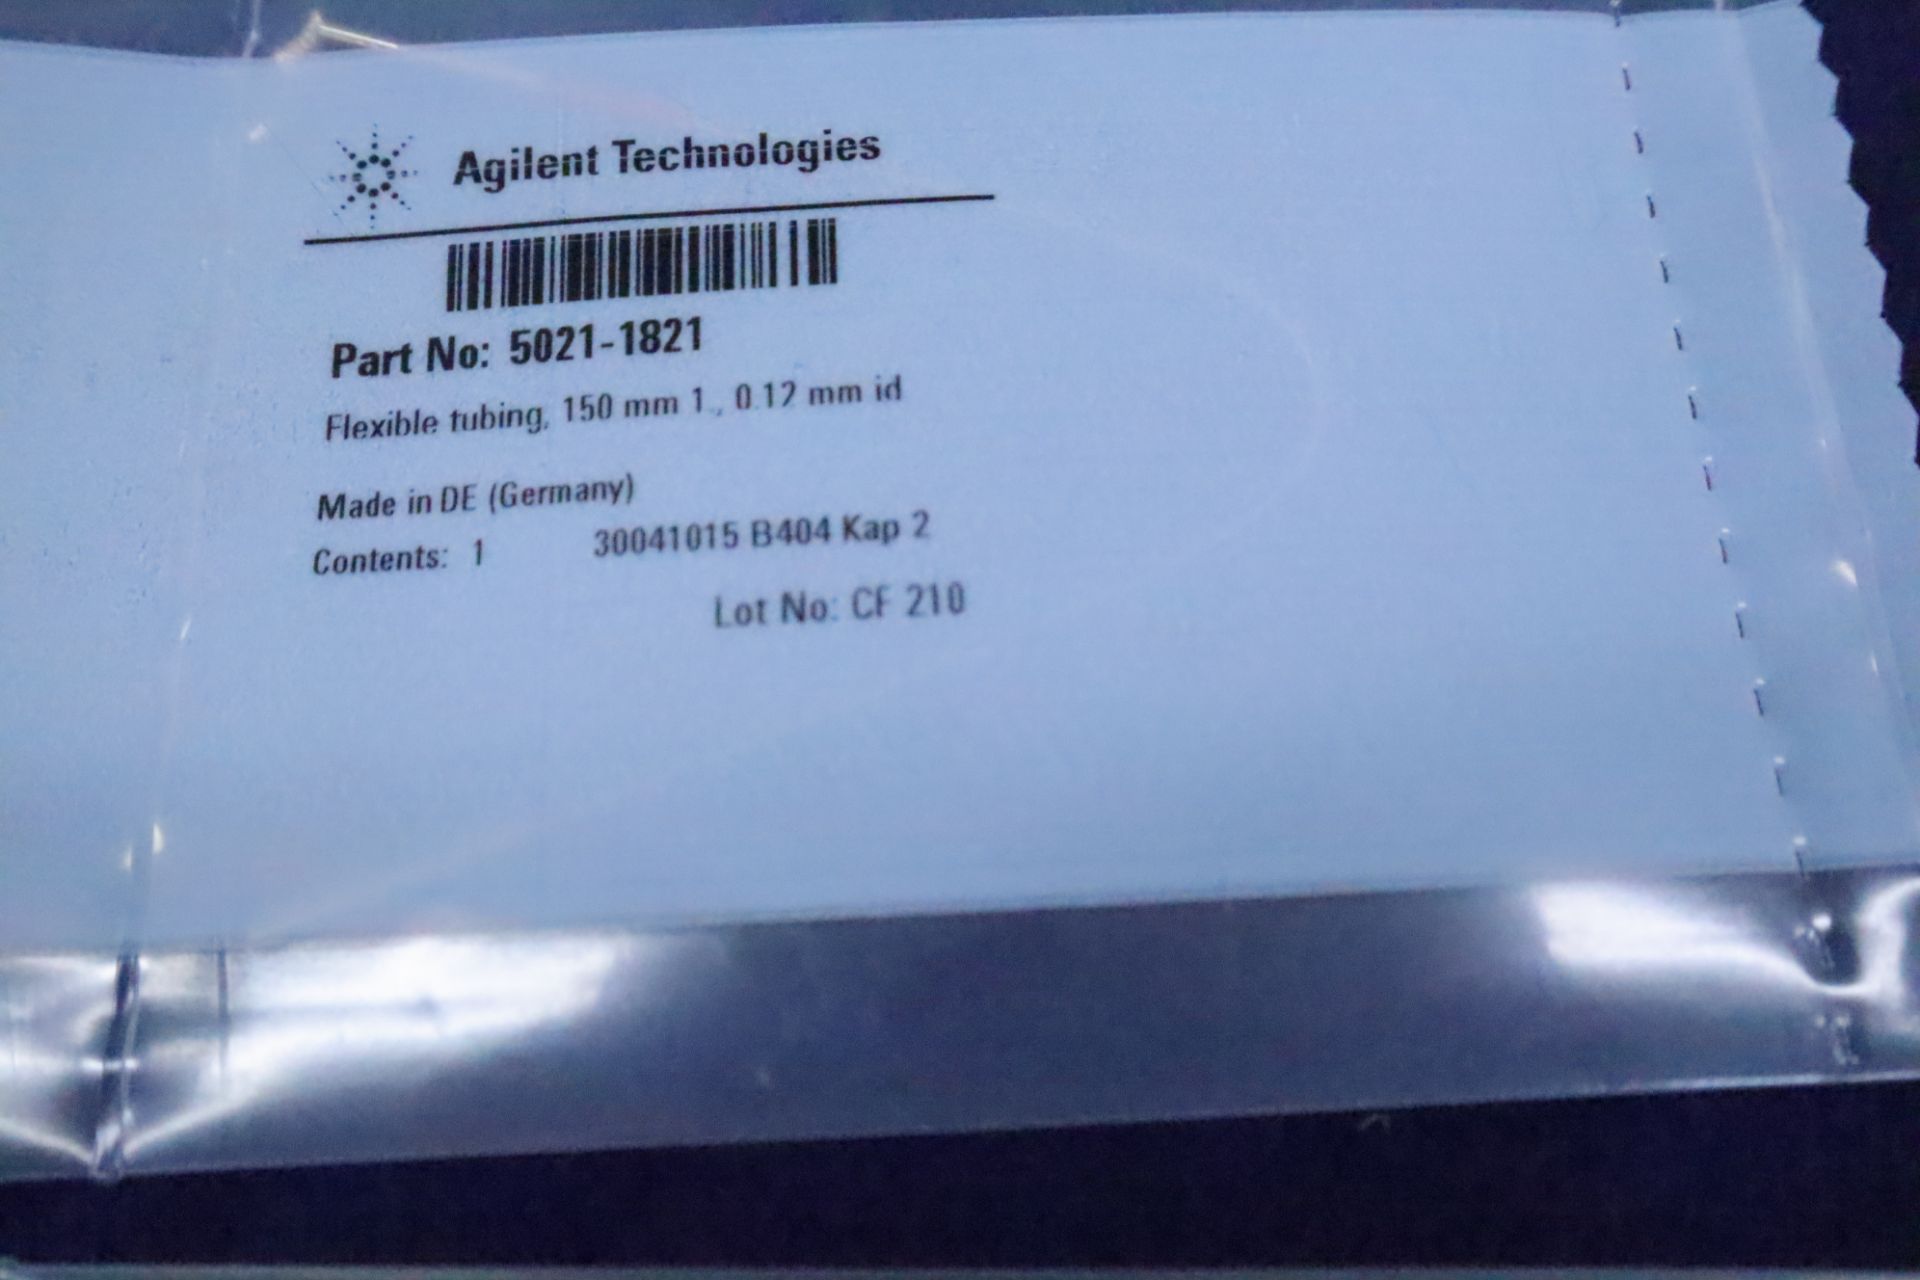 (NIB) Agilent Technologies OEM Replacement Parts for LC/MS Machines - Image 12 of 24